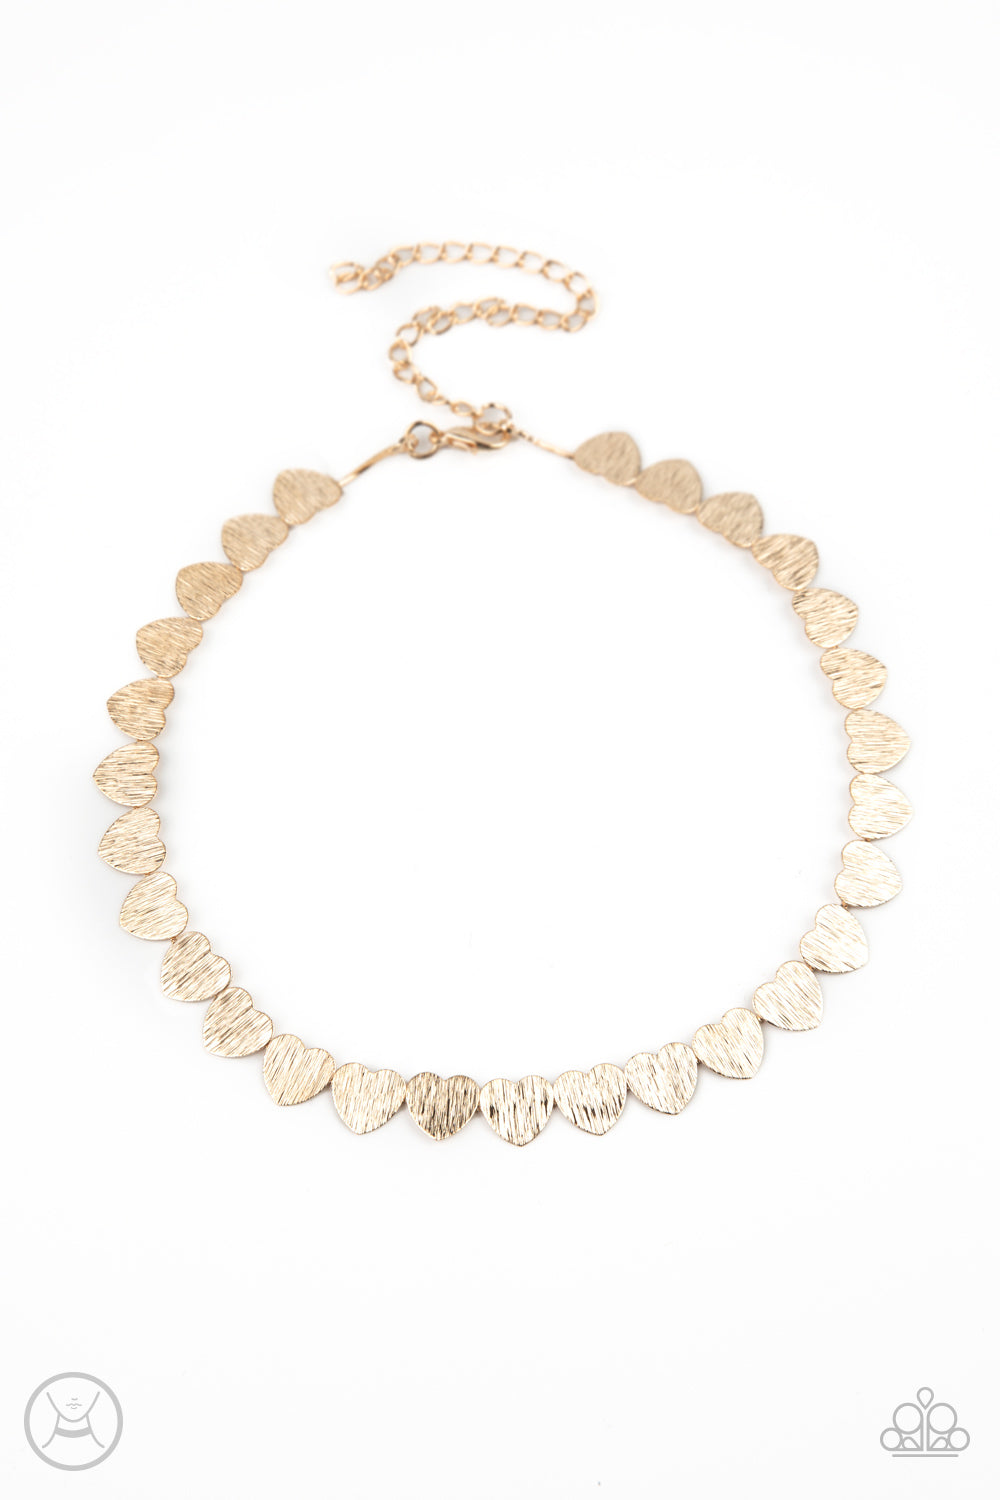 Playing HEART To Get - gold - Paparazzi necklace